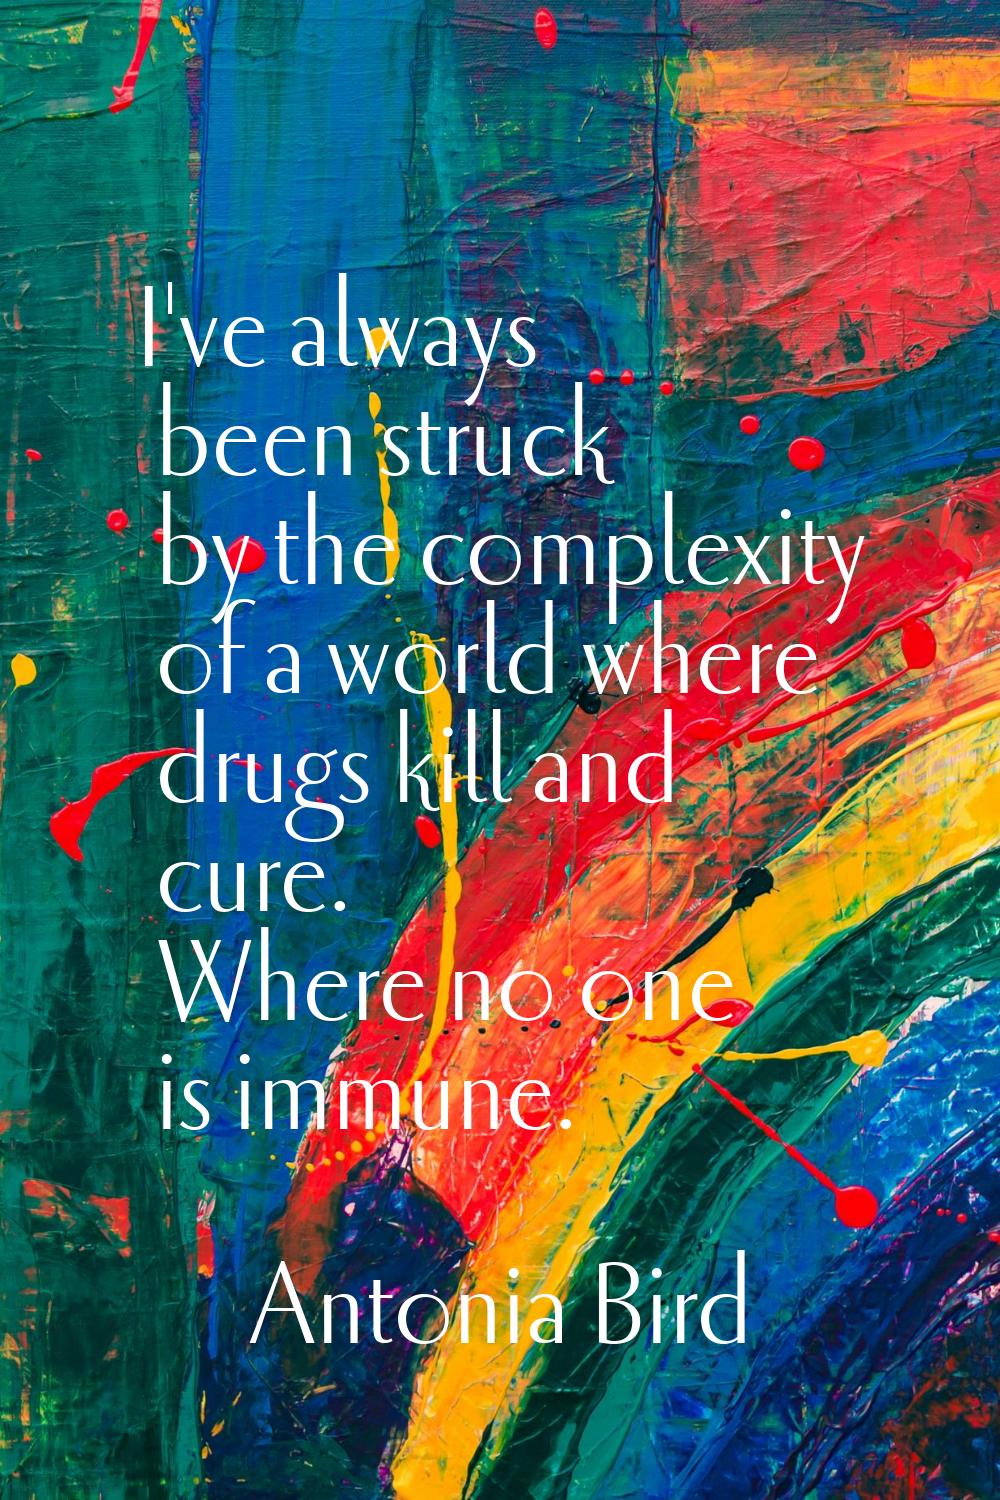 I've always been struck by the complexity of a world where drugs kill and cure. Where no one is imm